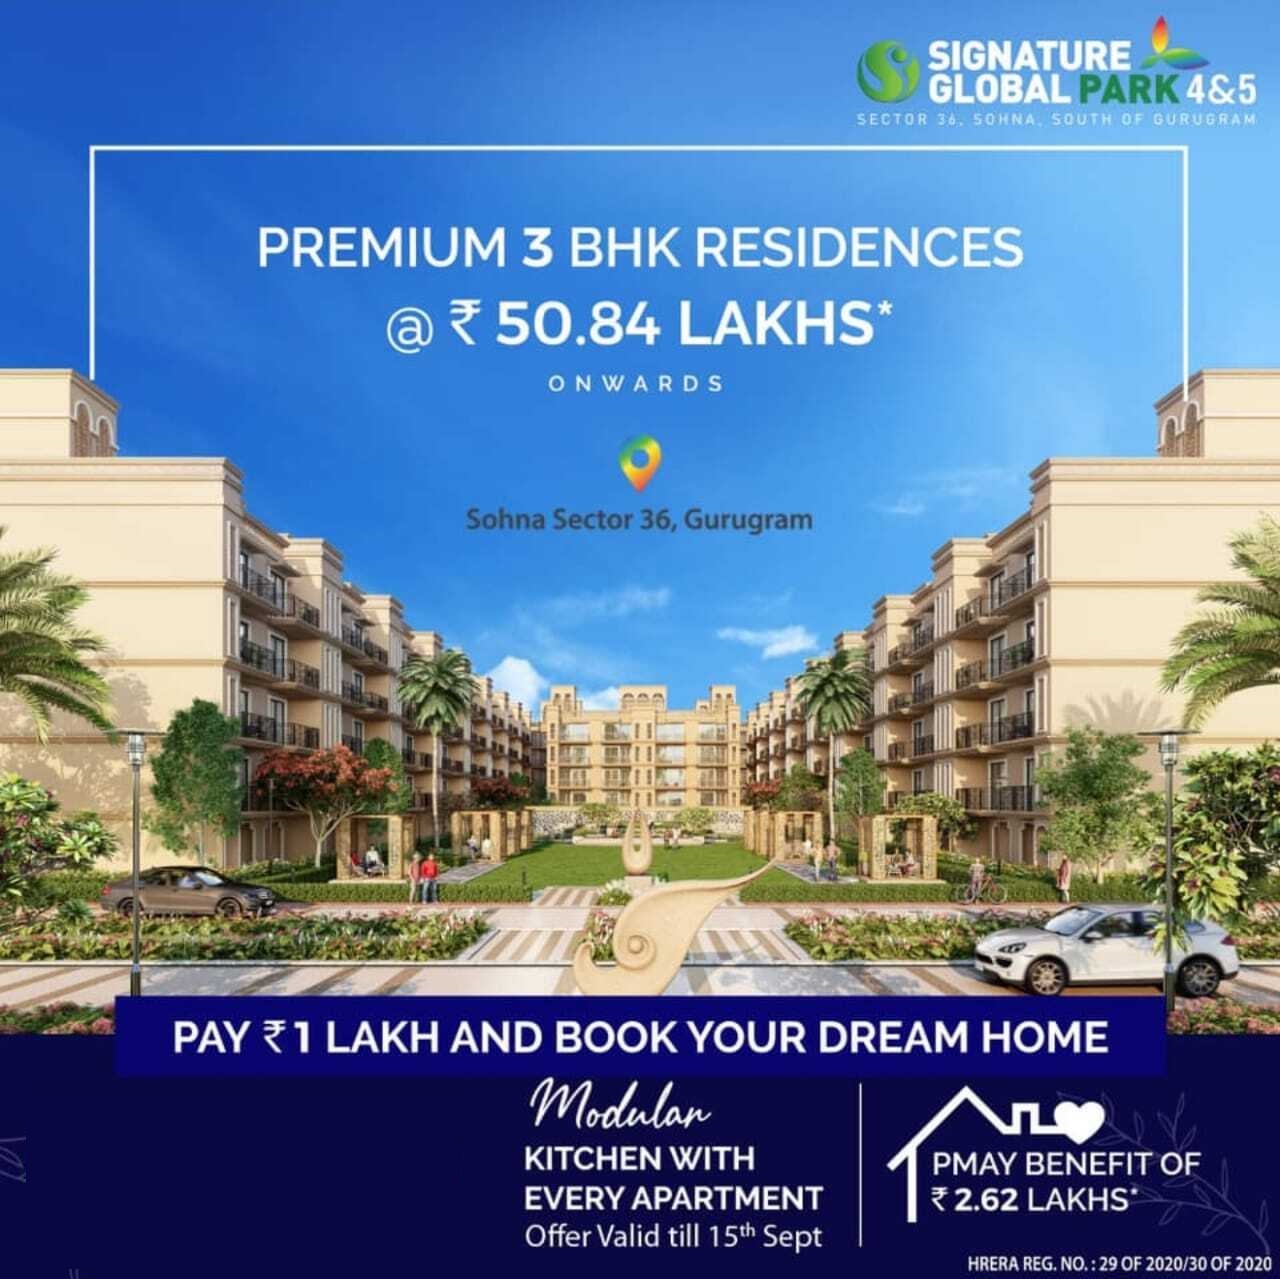 Pay 1 Lac and book your dream home at Signature Global Park 4 and 5, South Gurgaon Update